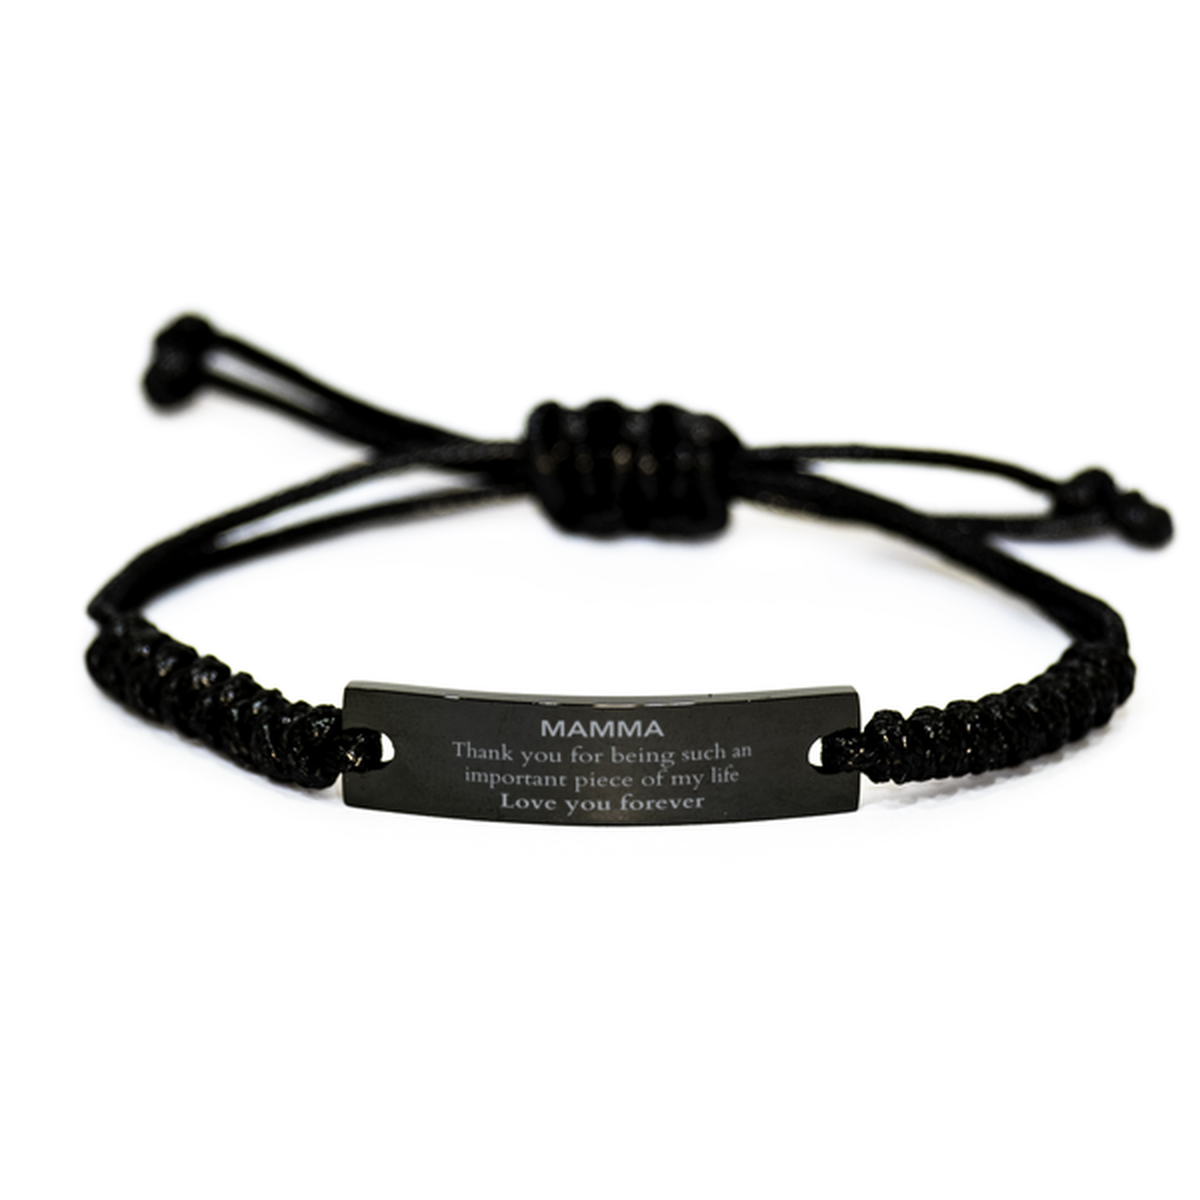 Appropriate Mamma Black Rope Bracelet Epic Birthday Gifts for Mamma Thank you for being such an important piece of my life Mamma Christmas Mothers Fathers Day